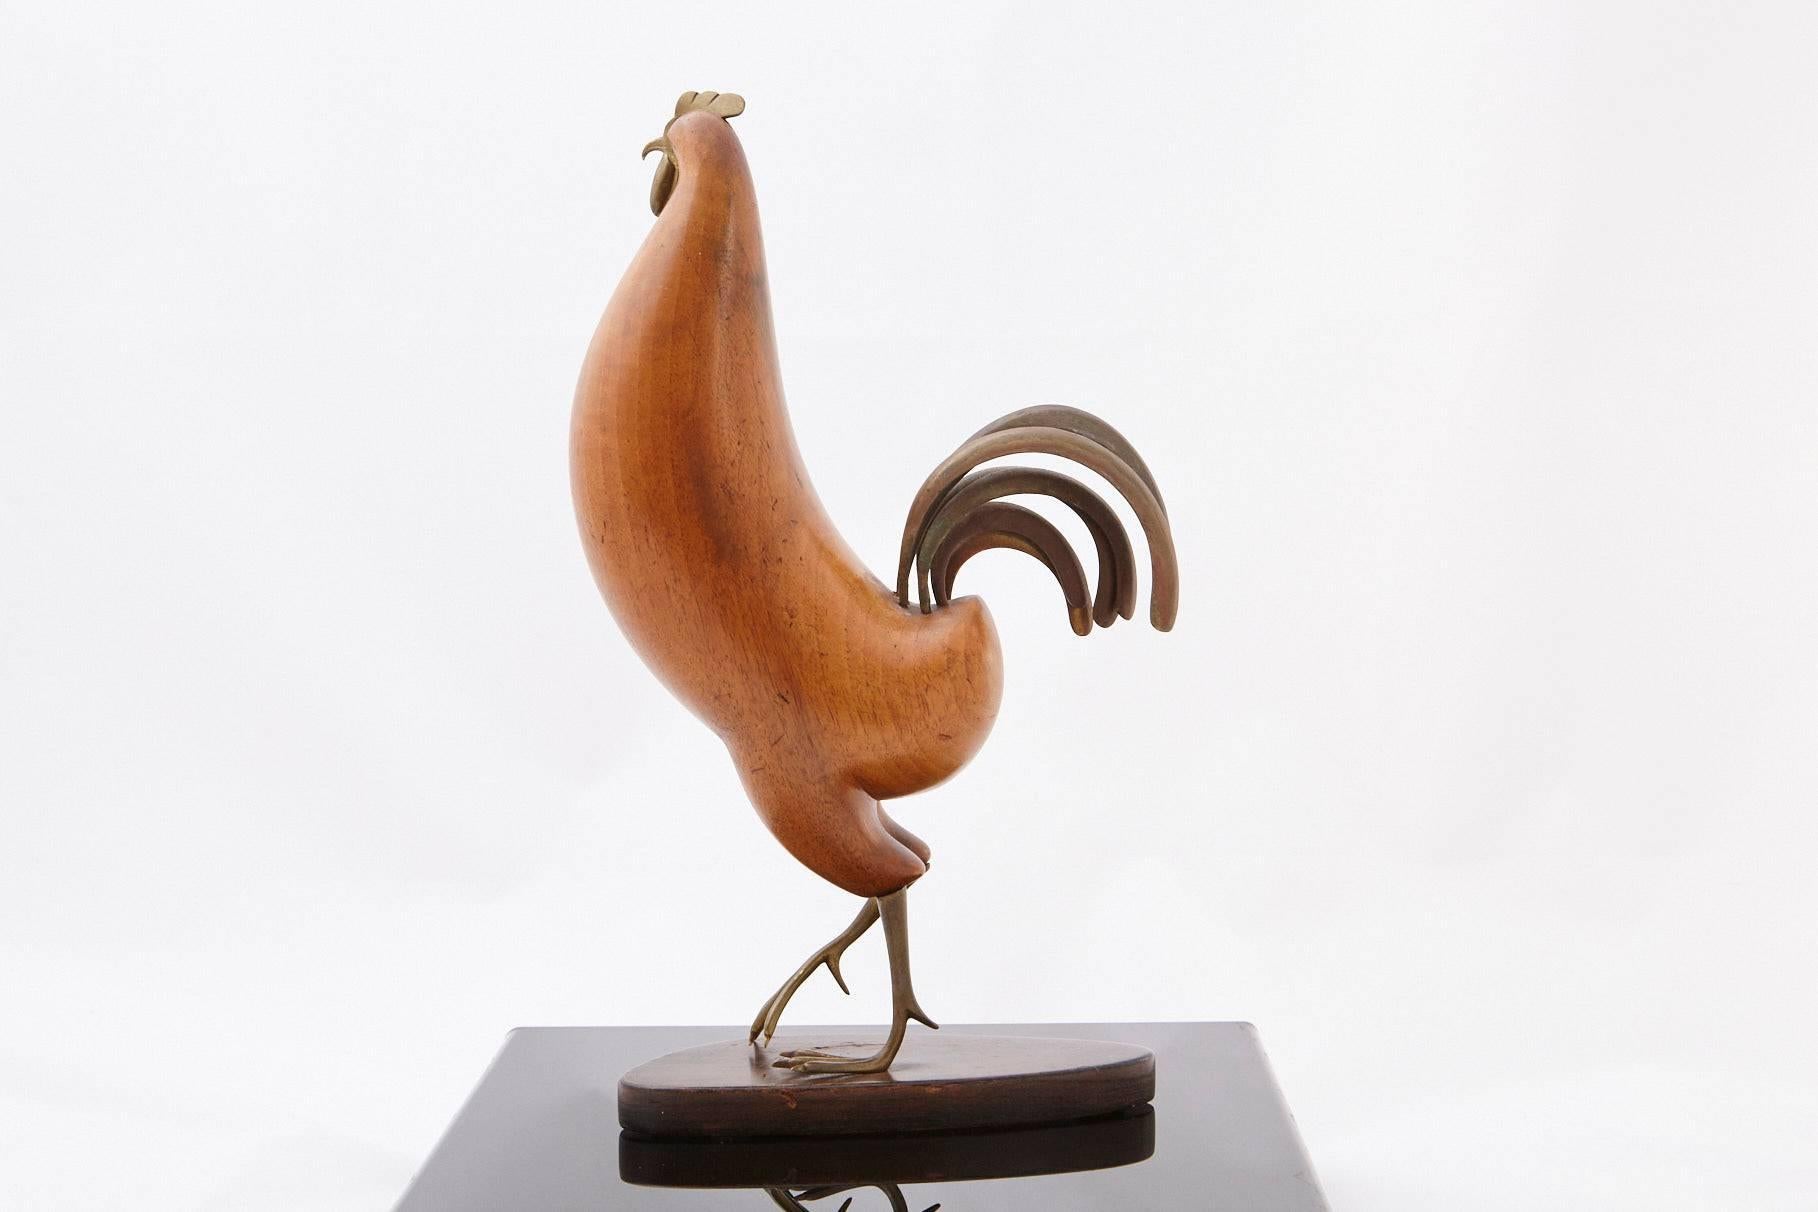 Elegant, streamlined, modernistic sculpture of a rooster by Karl Hagenauer of Vienna. The rooster's tail, feet and comb are crafted from bronze, the body hand-carved from walnut, all raised on a tinted walnut base.
Hagenauer has finely captured the